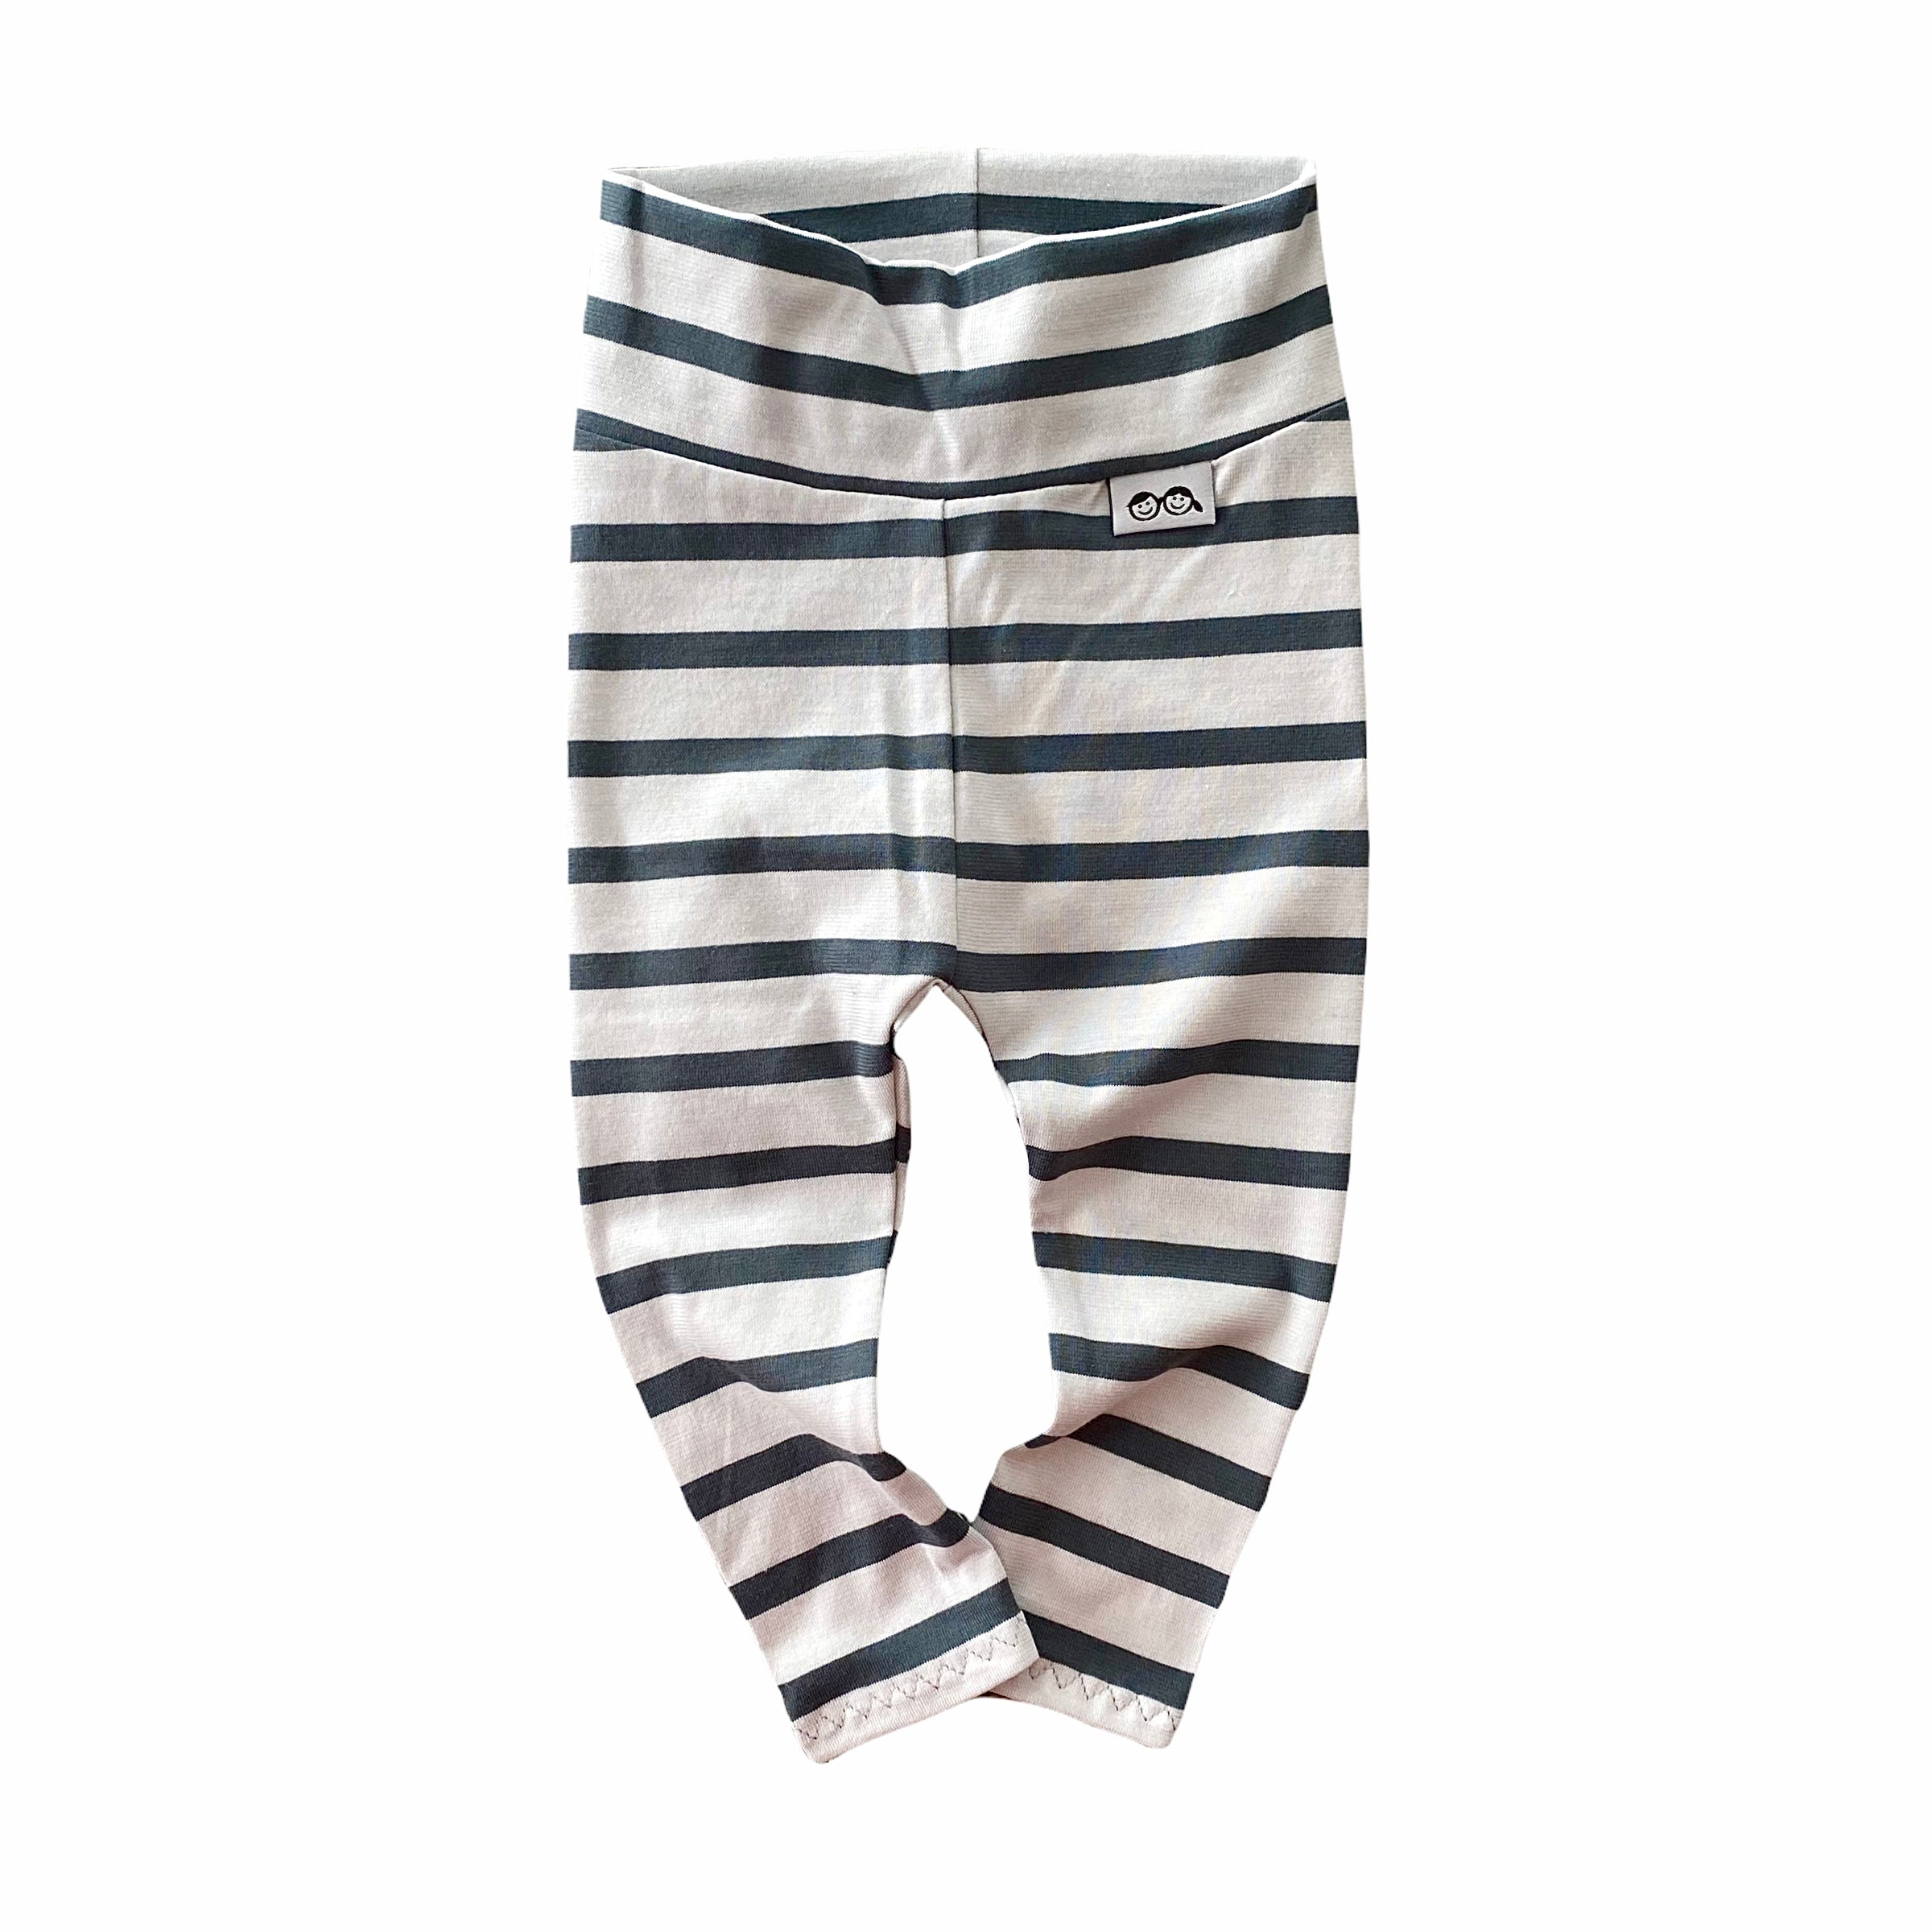 DYI, Pants & Jumpsuits, Dyi Gray With White Stripe Legging Size Xs New  Condition No Tags